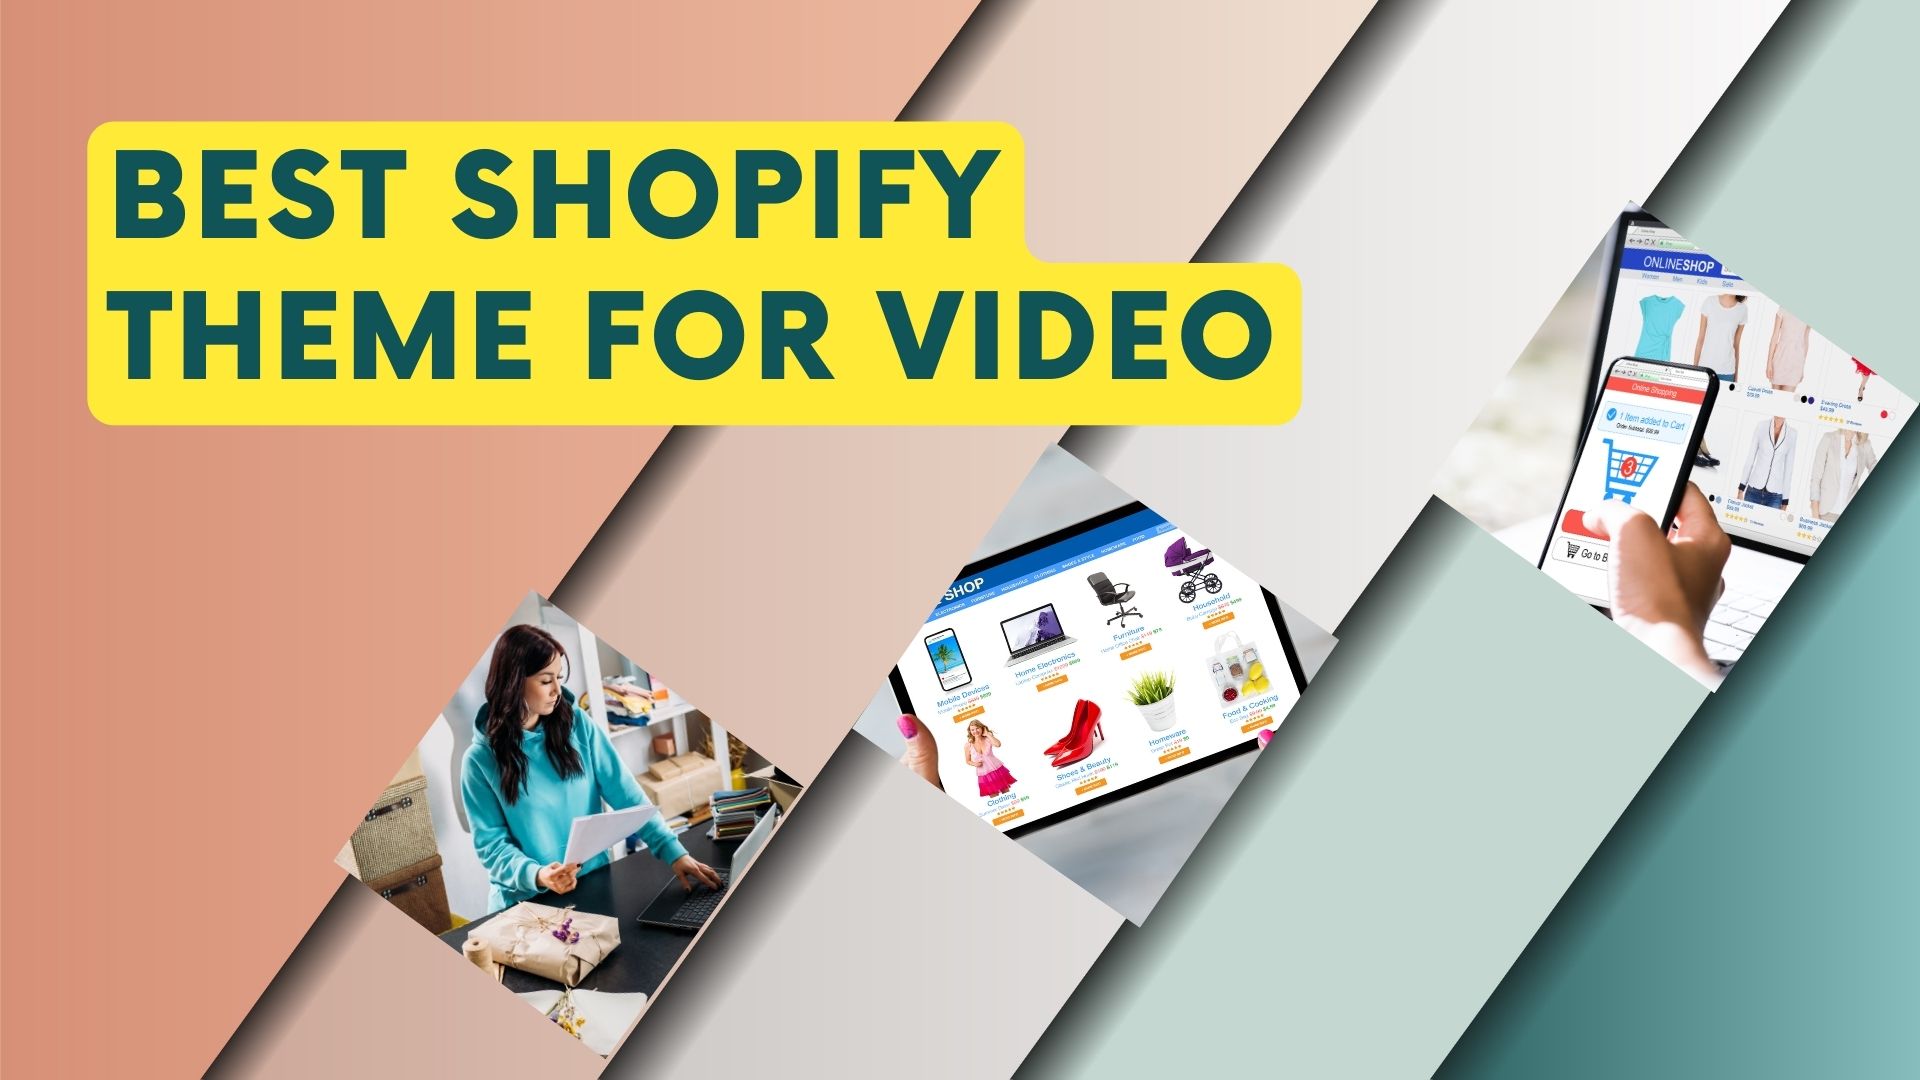 Best Shopify Theme for Video